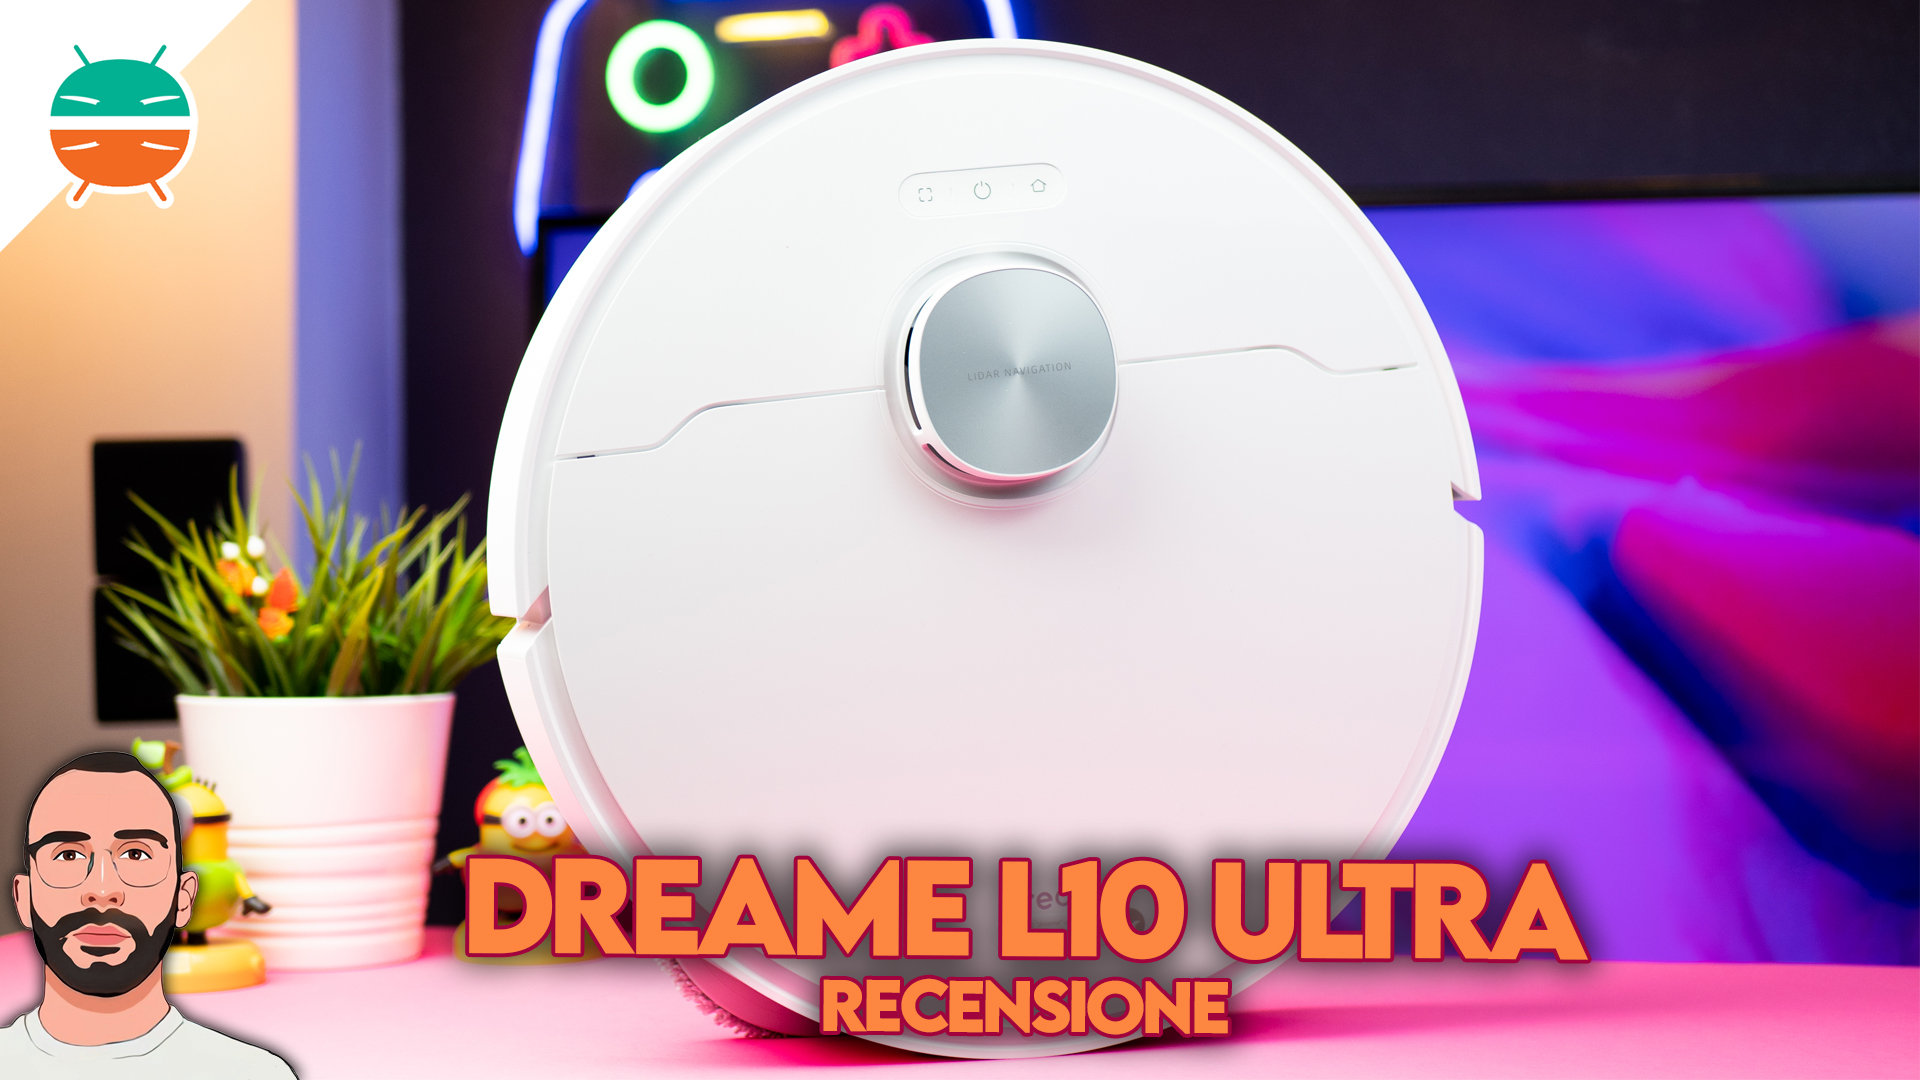 Dreame L10 Ultra review: it really DESTROYED the COMPETITION - GizChina.it